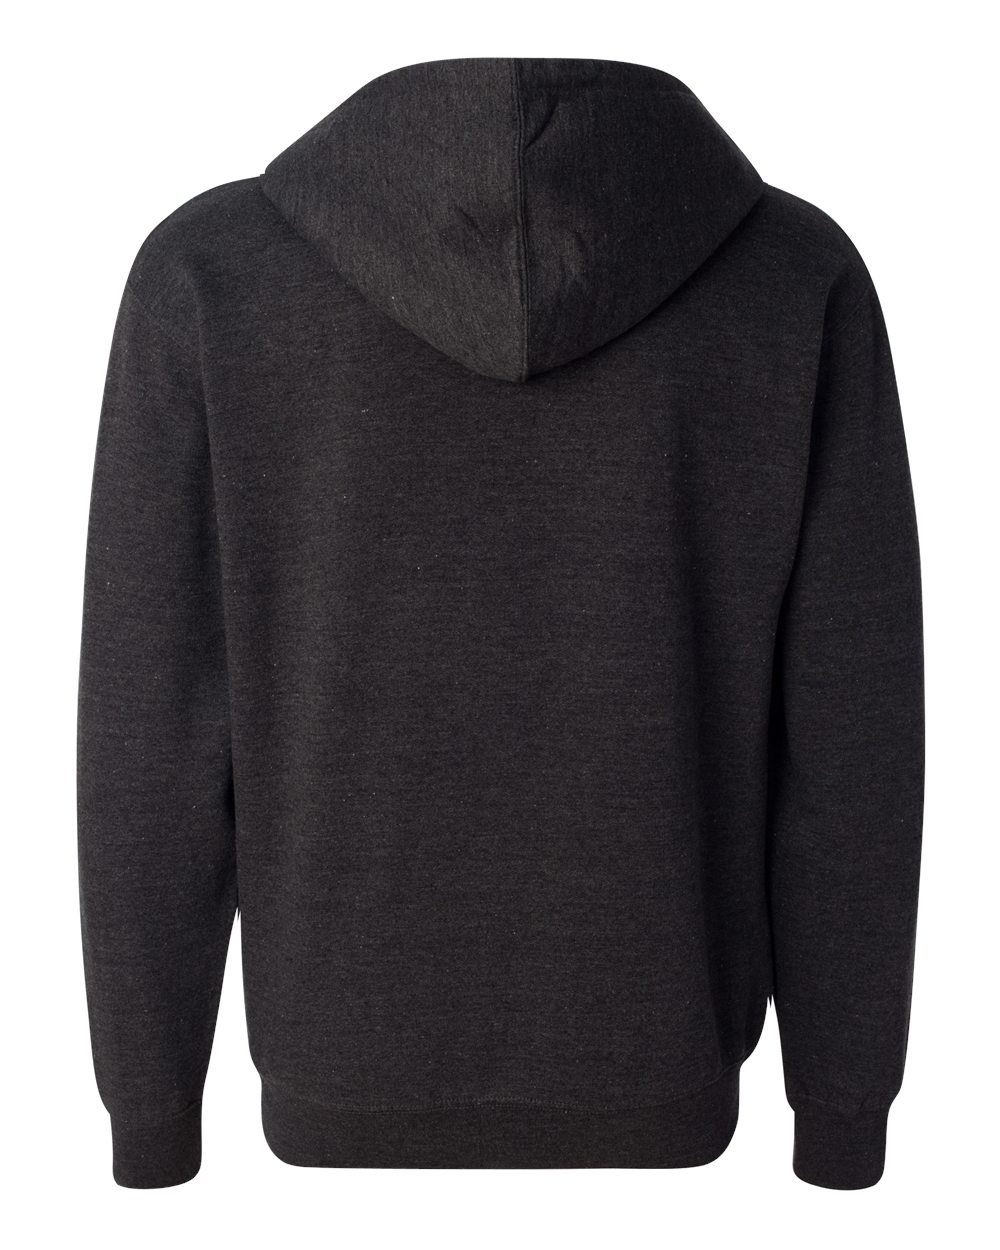 Independent Trading Co. SS4500Z | Midweight Full-Zip Hooded Sweatshirt ...